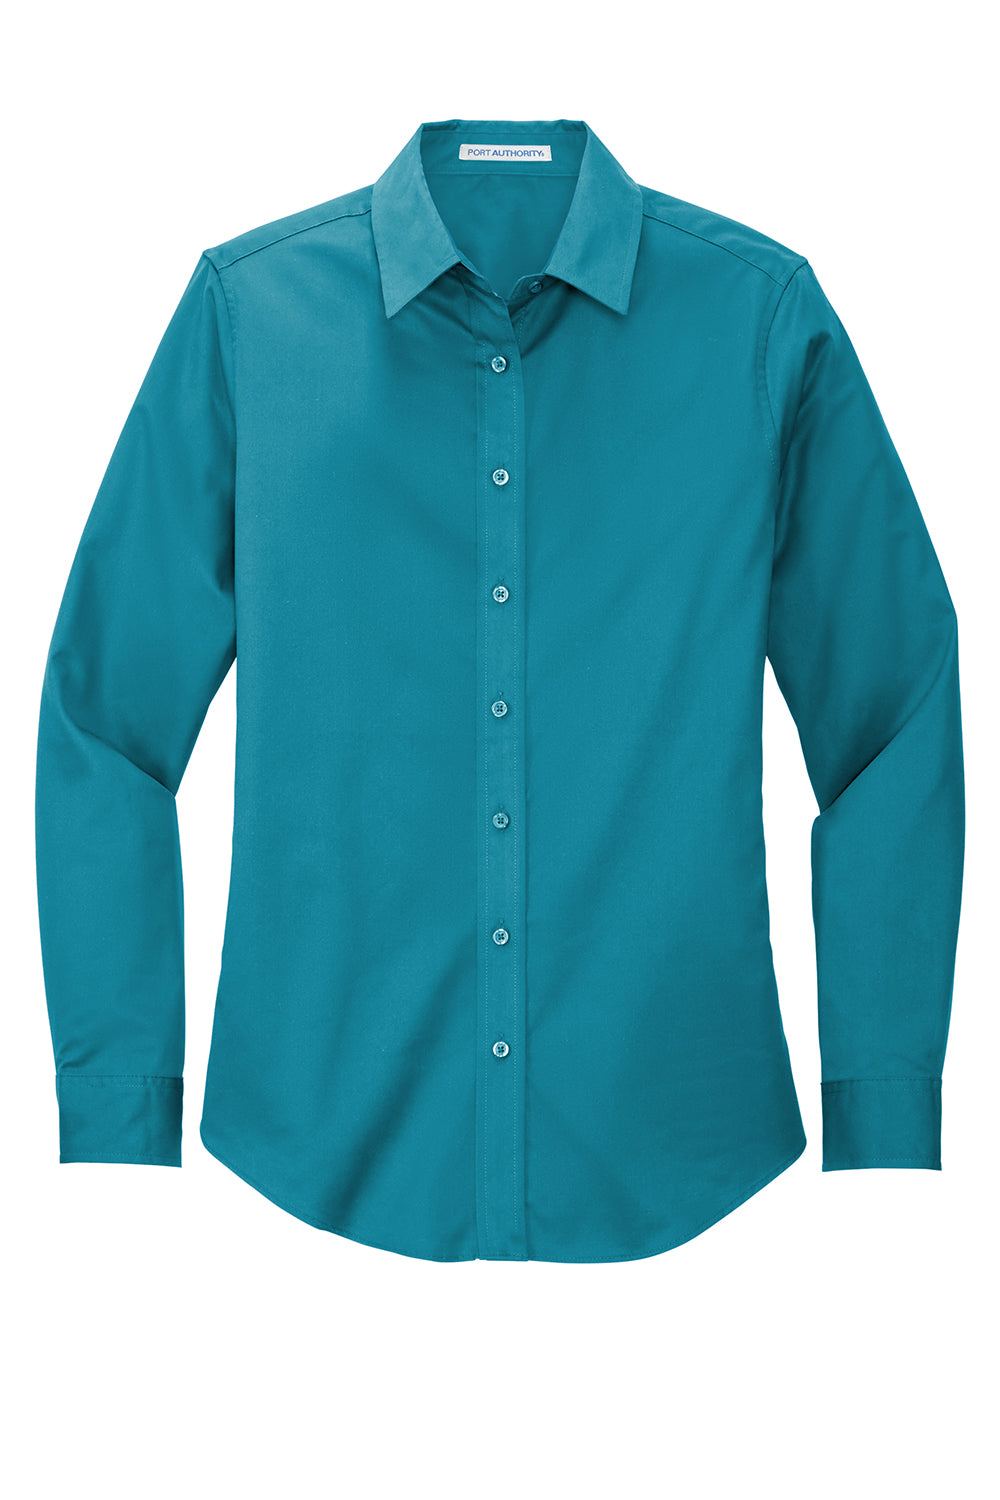 Port Authority L608 Womens Easy Care Wrinkle Resistant Long Sleeve Button Down Shirt Teal Green Flat Front